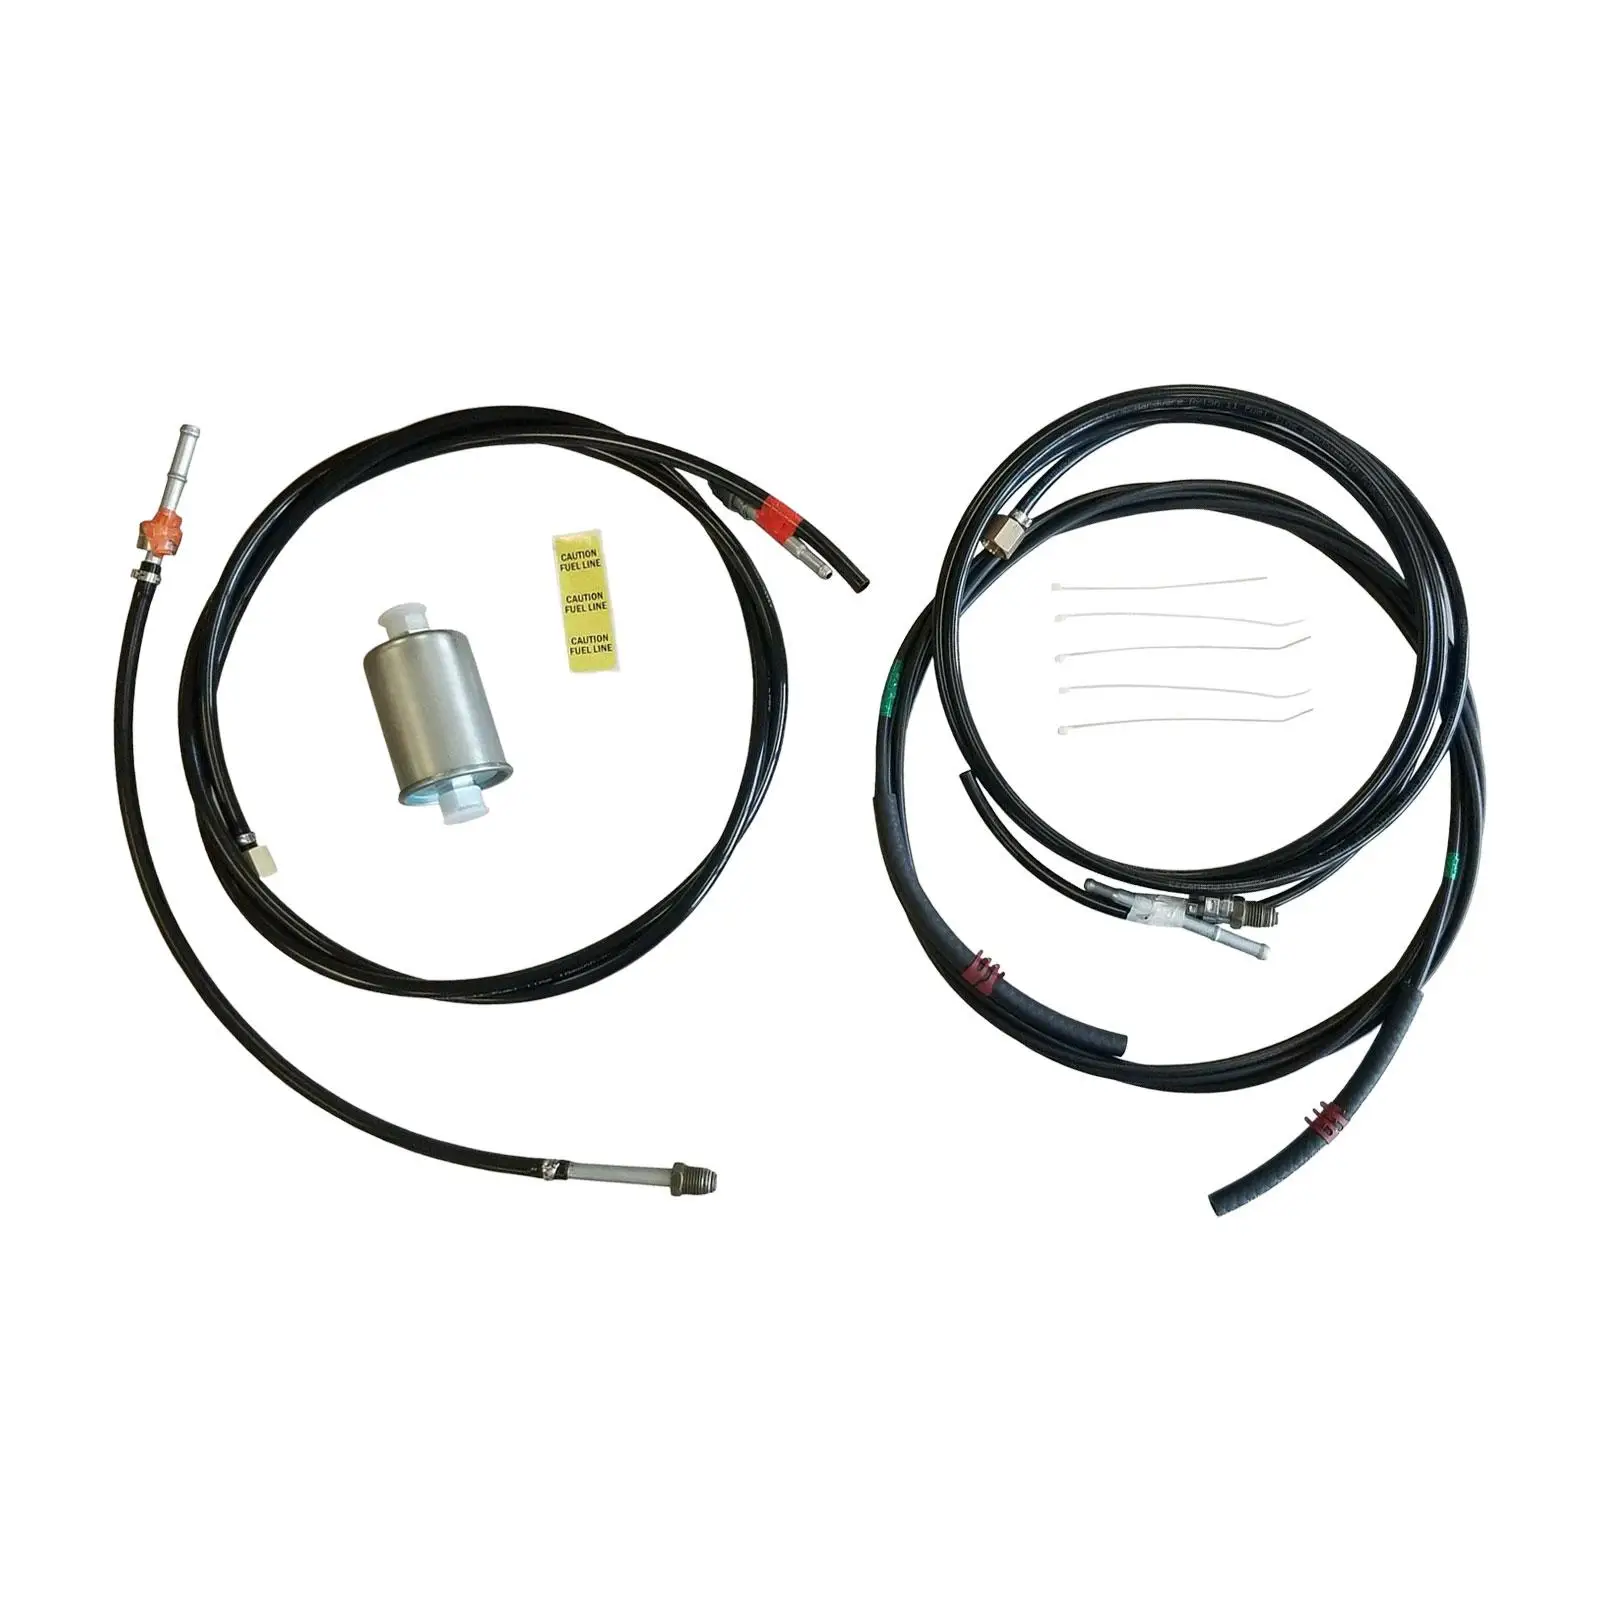 Fuel Lines Assembly Nfr0013 Automotive Parts for Chevrolet 1988-1997